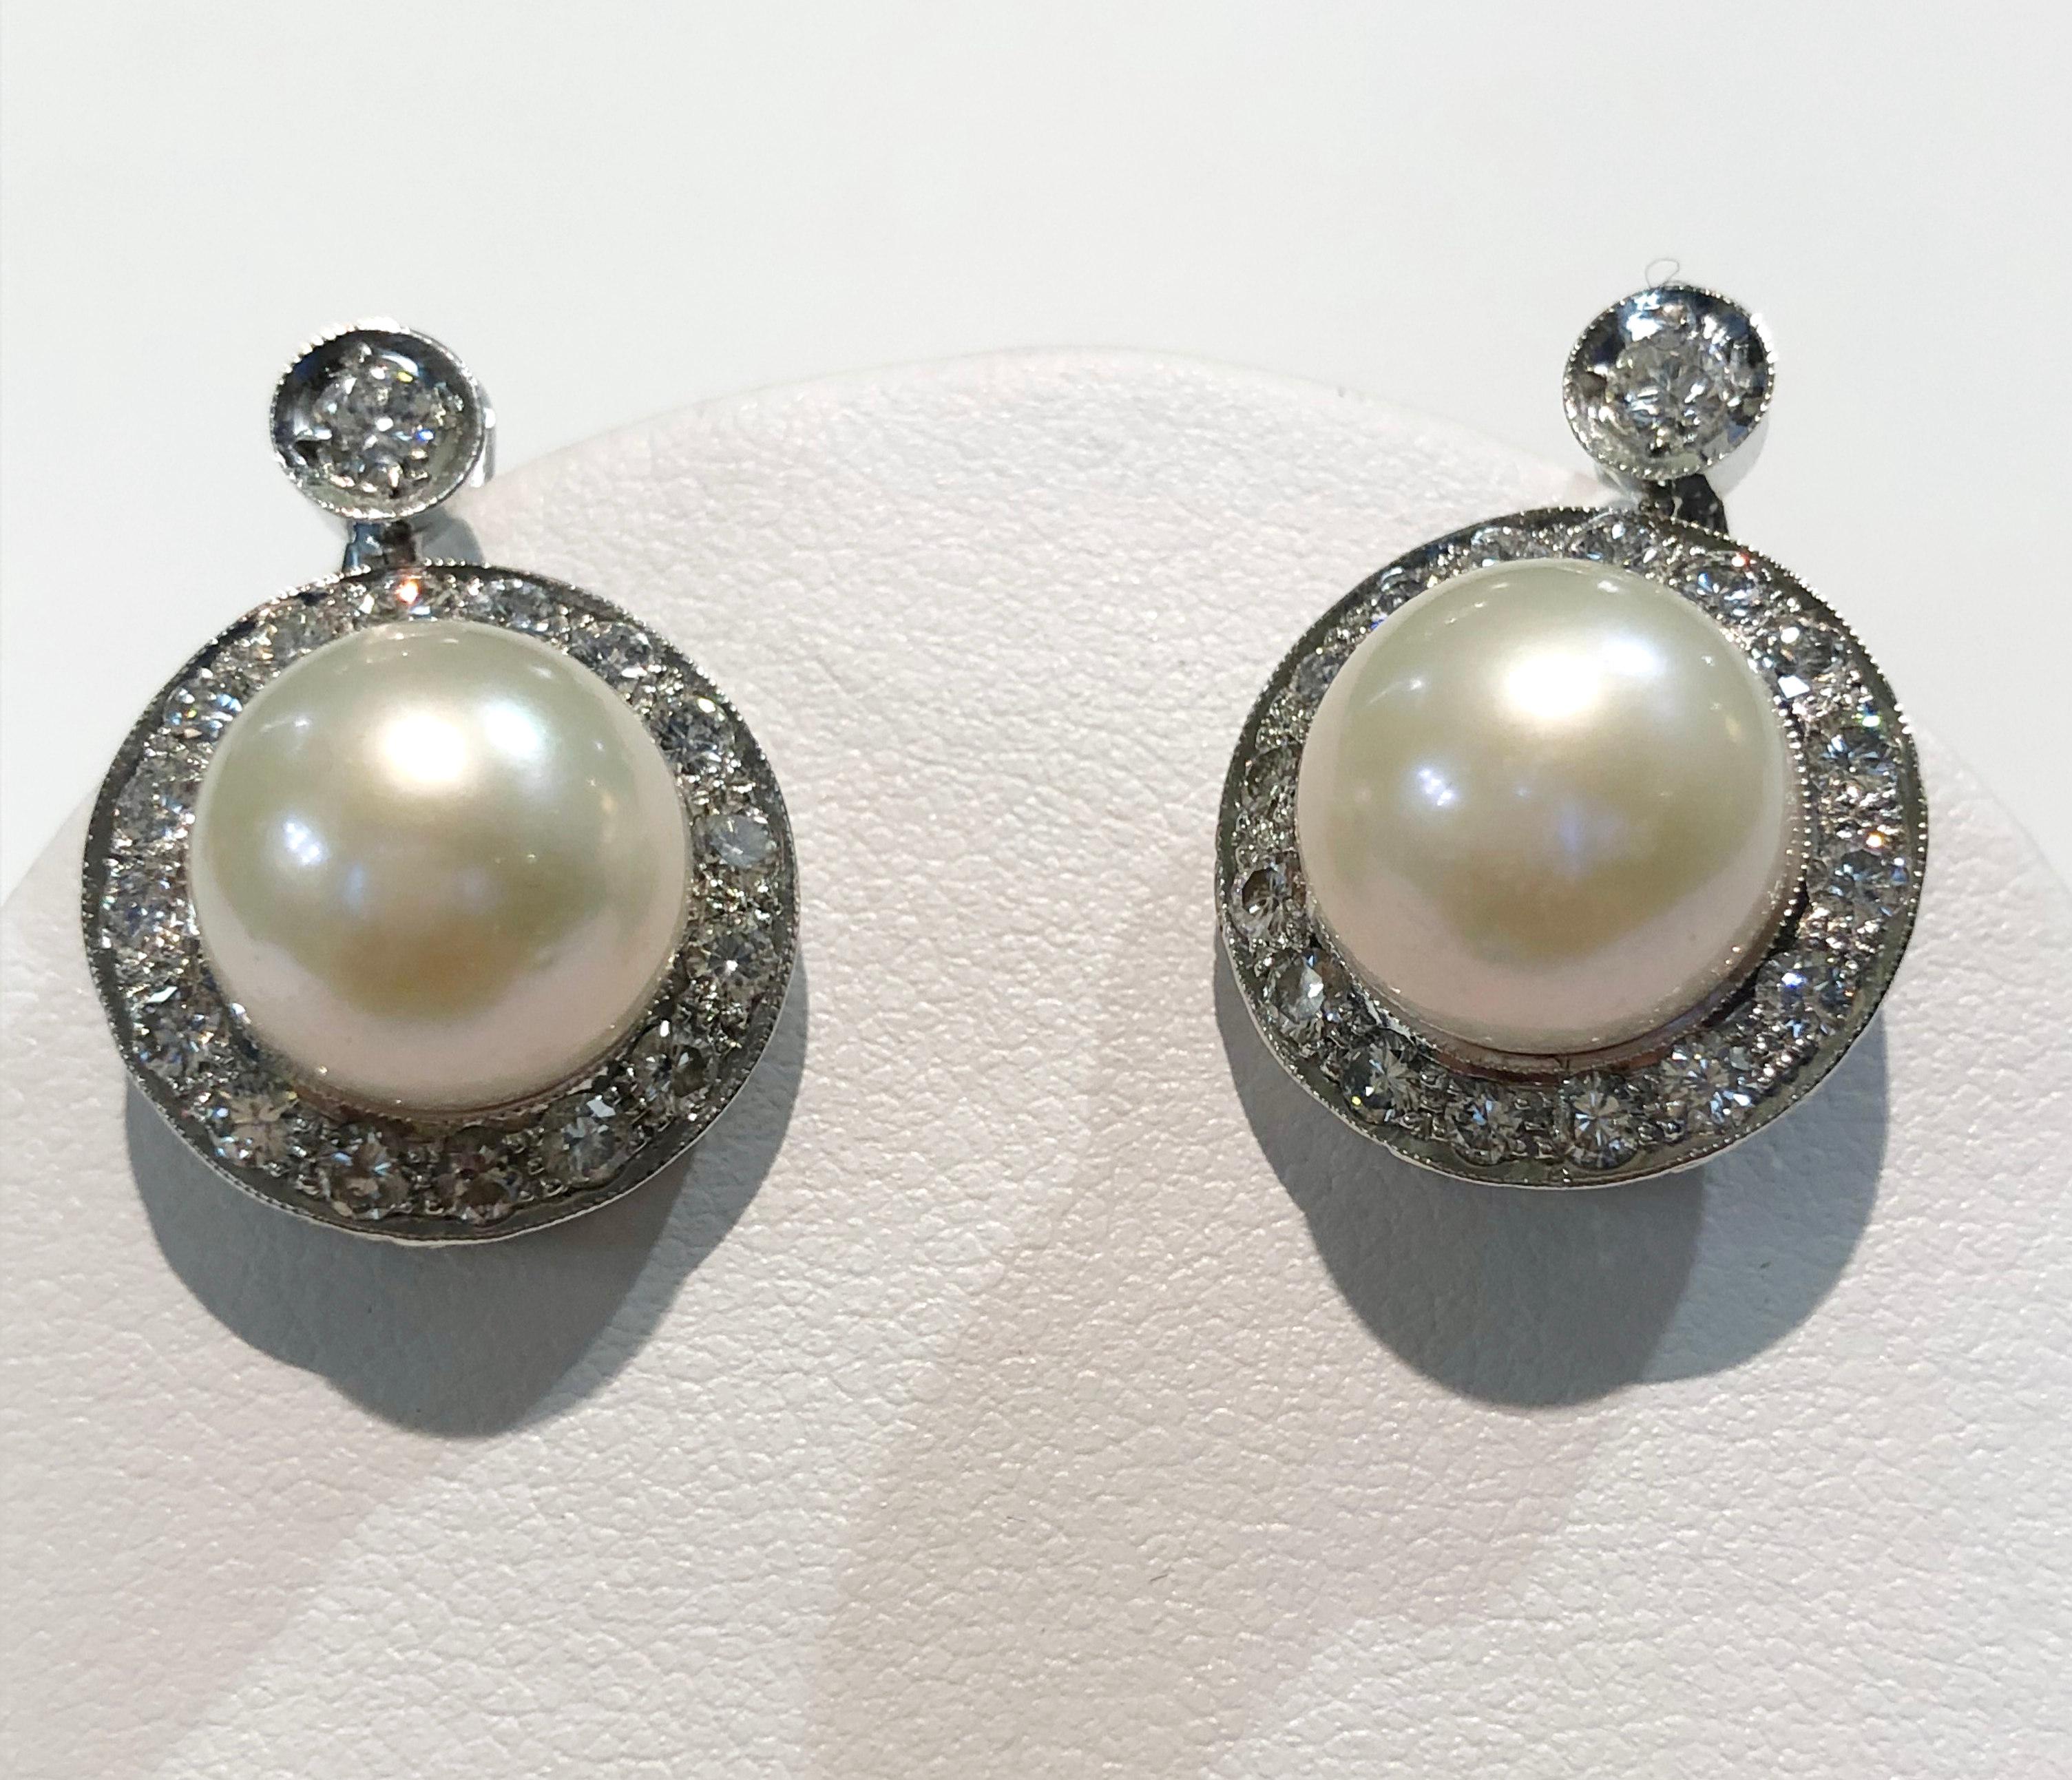 Brilliant Cut Pair of 18 Karat White Gold Pearl and Diamond Earrings For Sale